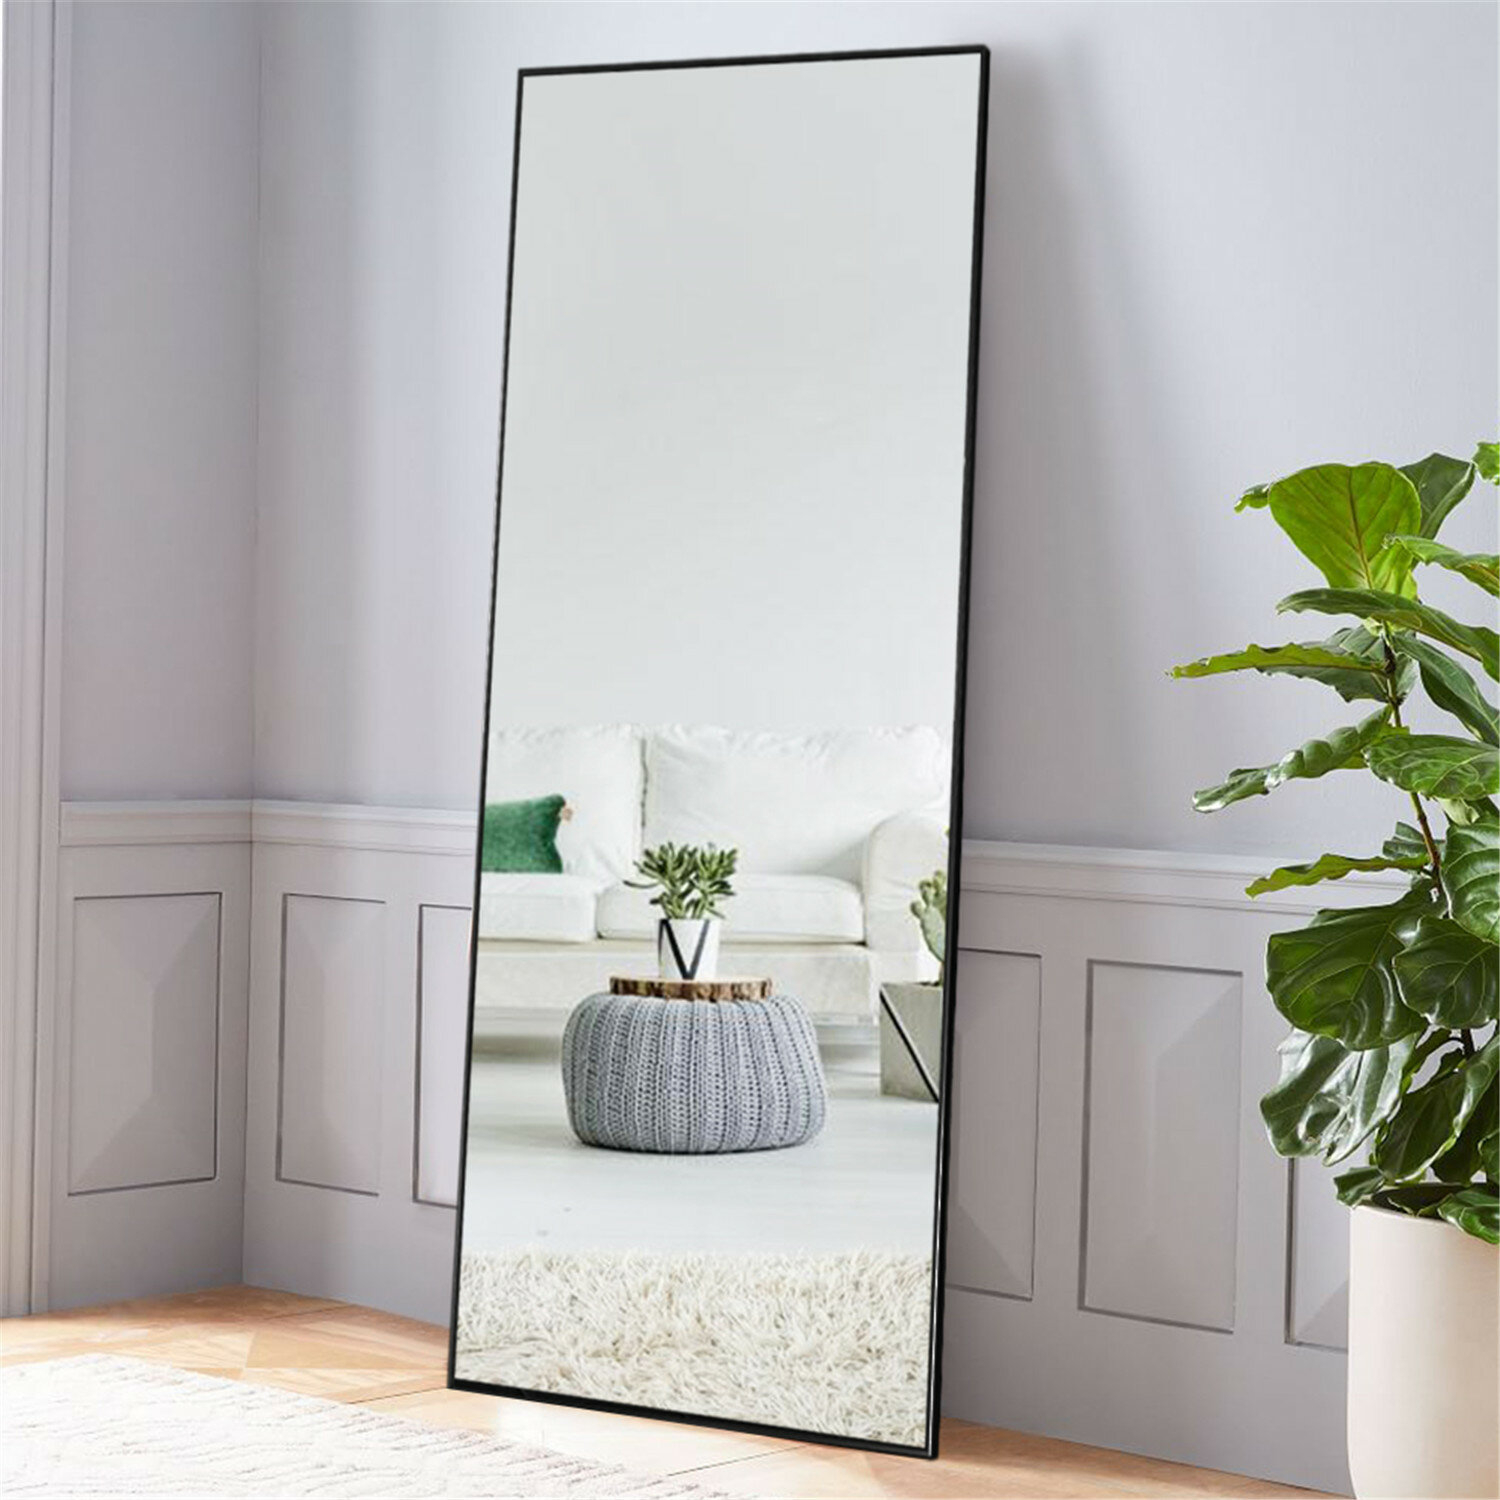 Standing Hanging or Leaning Against Wall Somins Full Length Mirror Rustic Wood Framed Vertical and Horizontal Tall Floor Mirror Decorative Wall Mirror 63inch